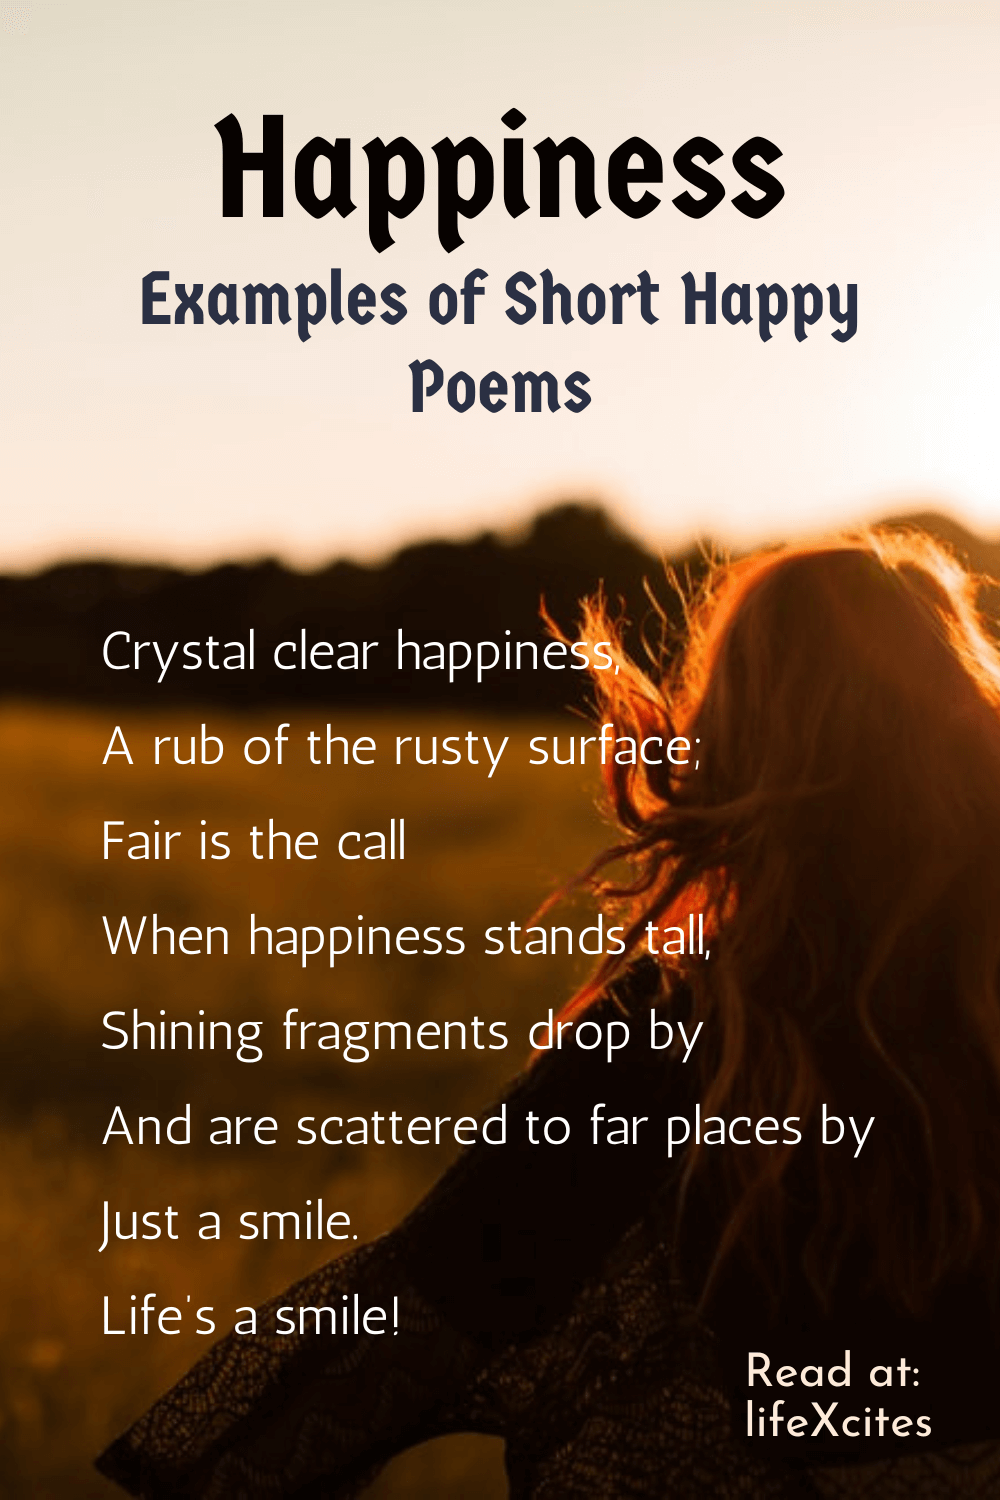 Happiness – Examples of Short Happy Poems